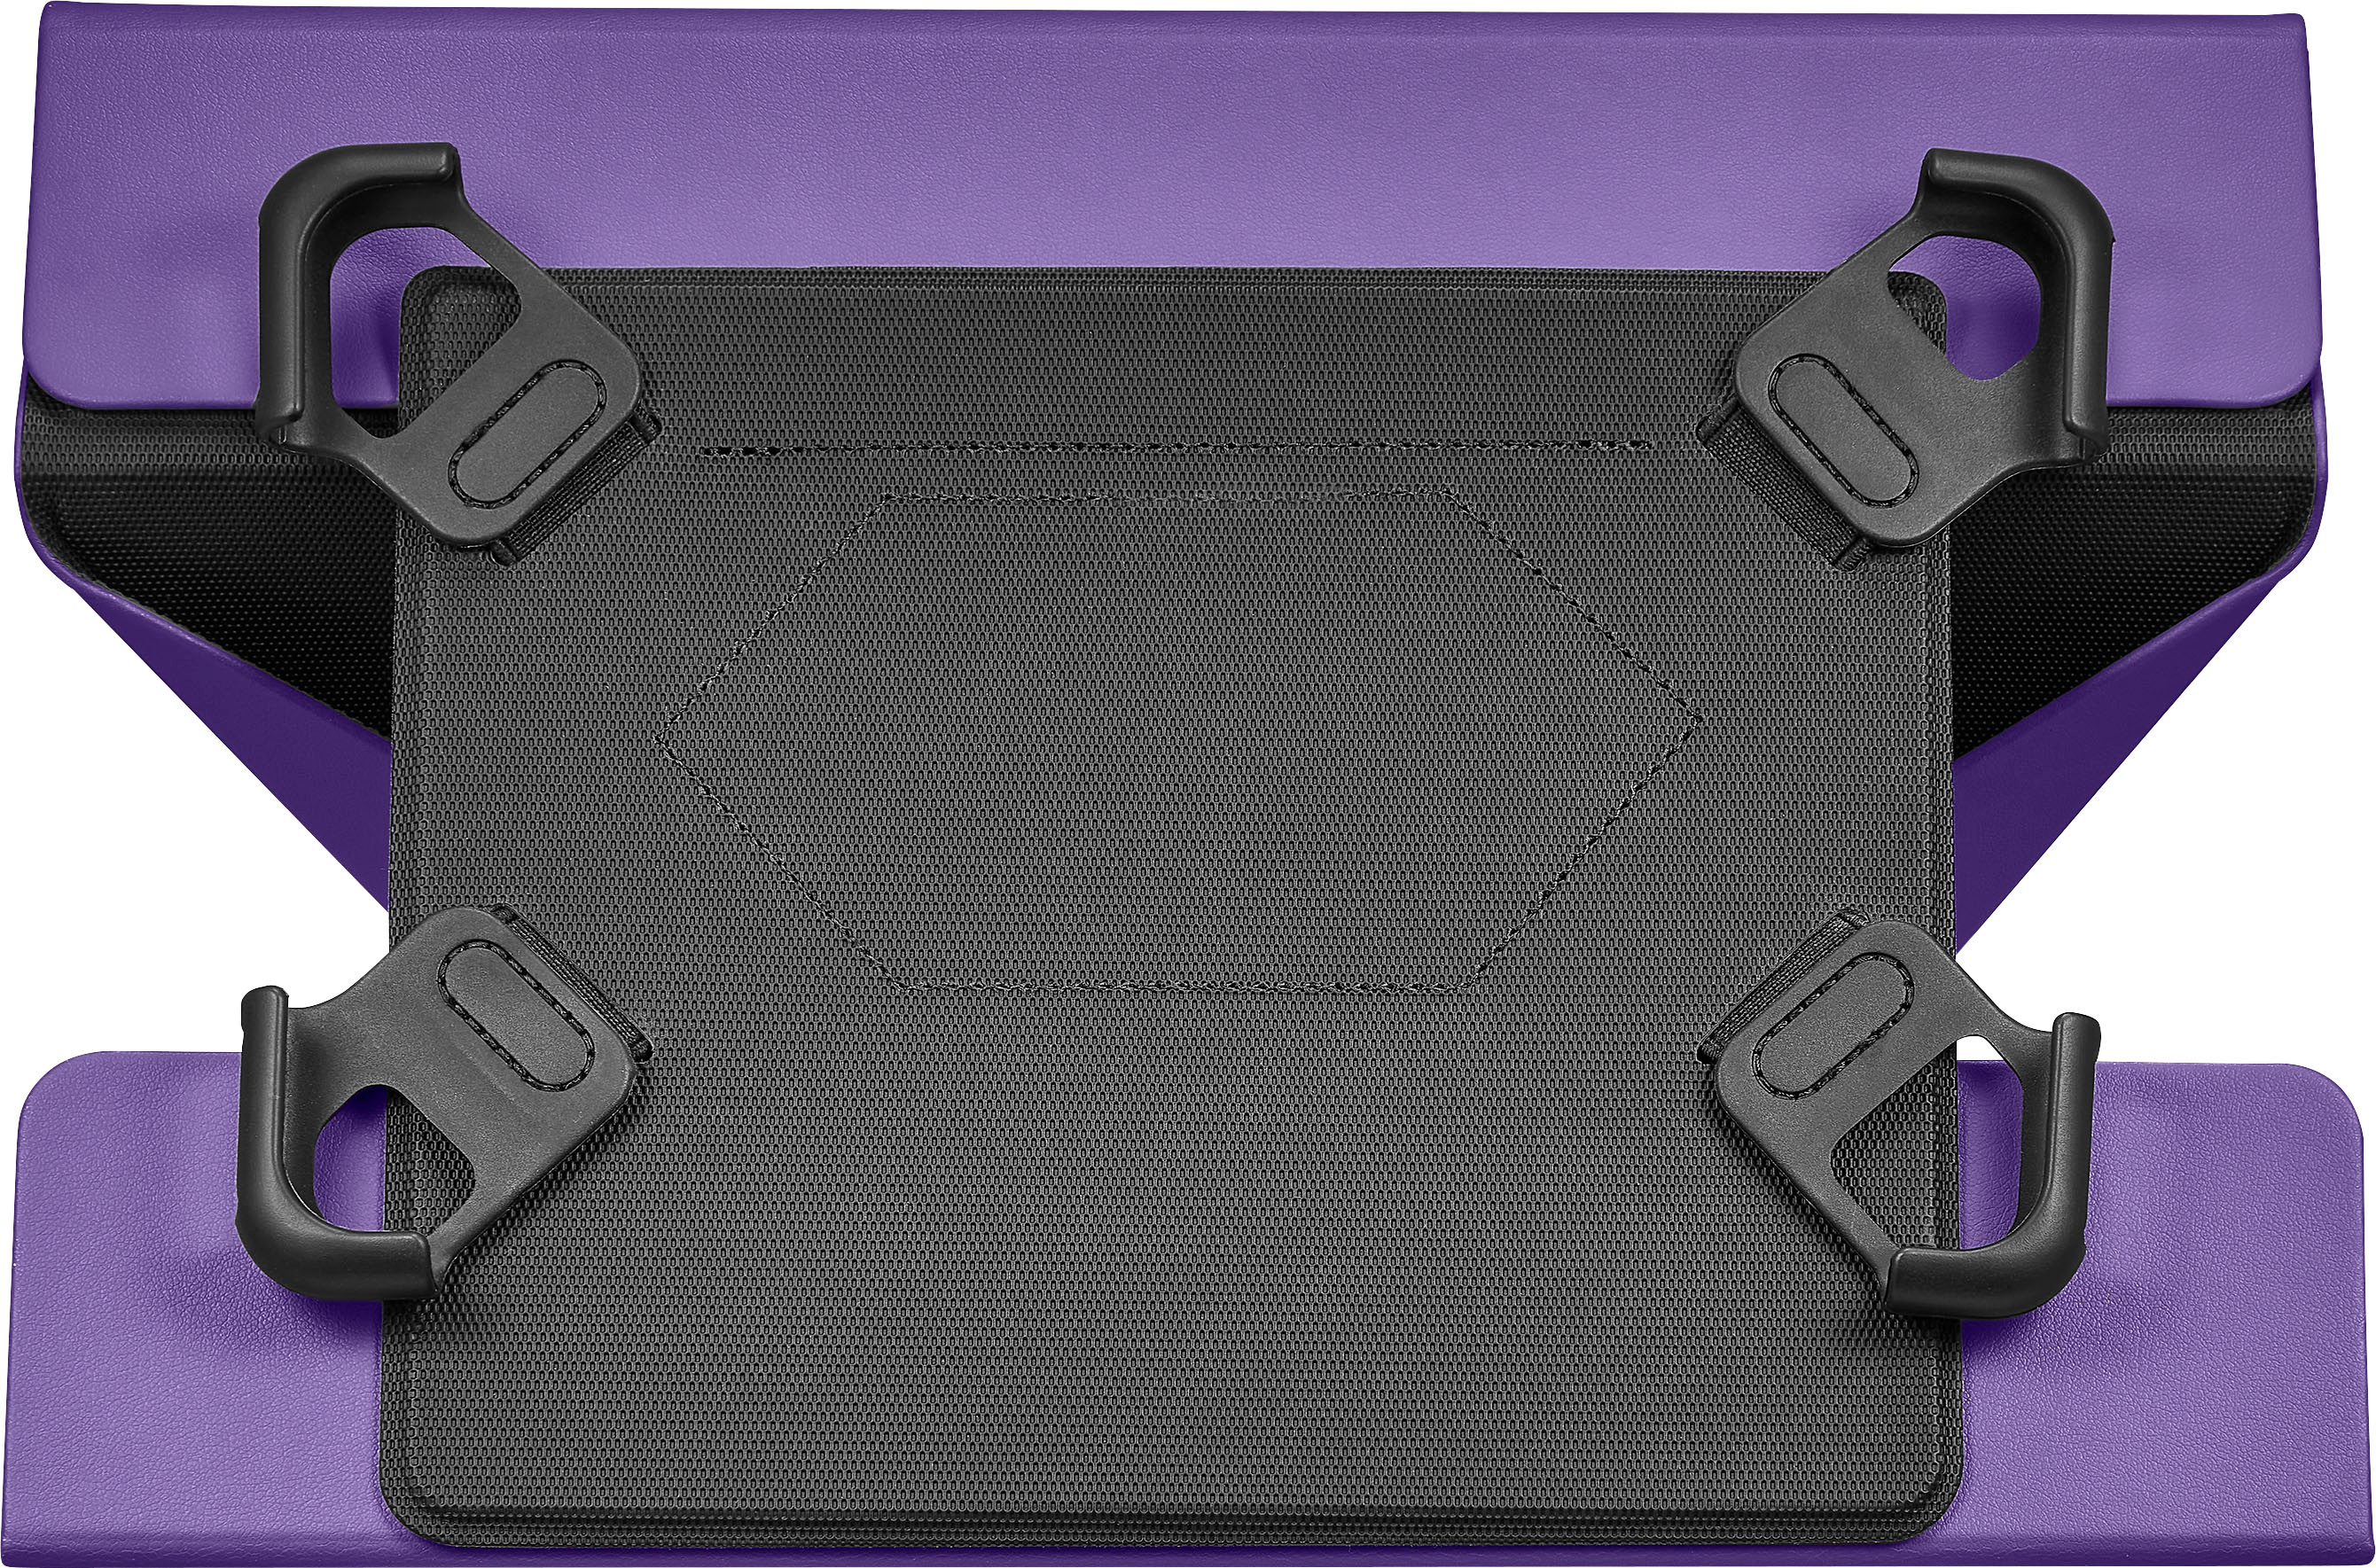 Angle View: Insignia™ - Universal FlexView Folio Case for most 9" to 11" tablets - Purple